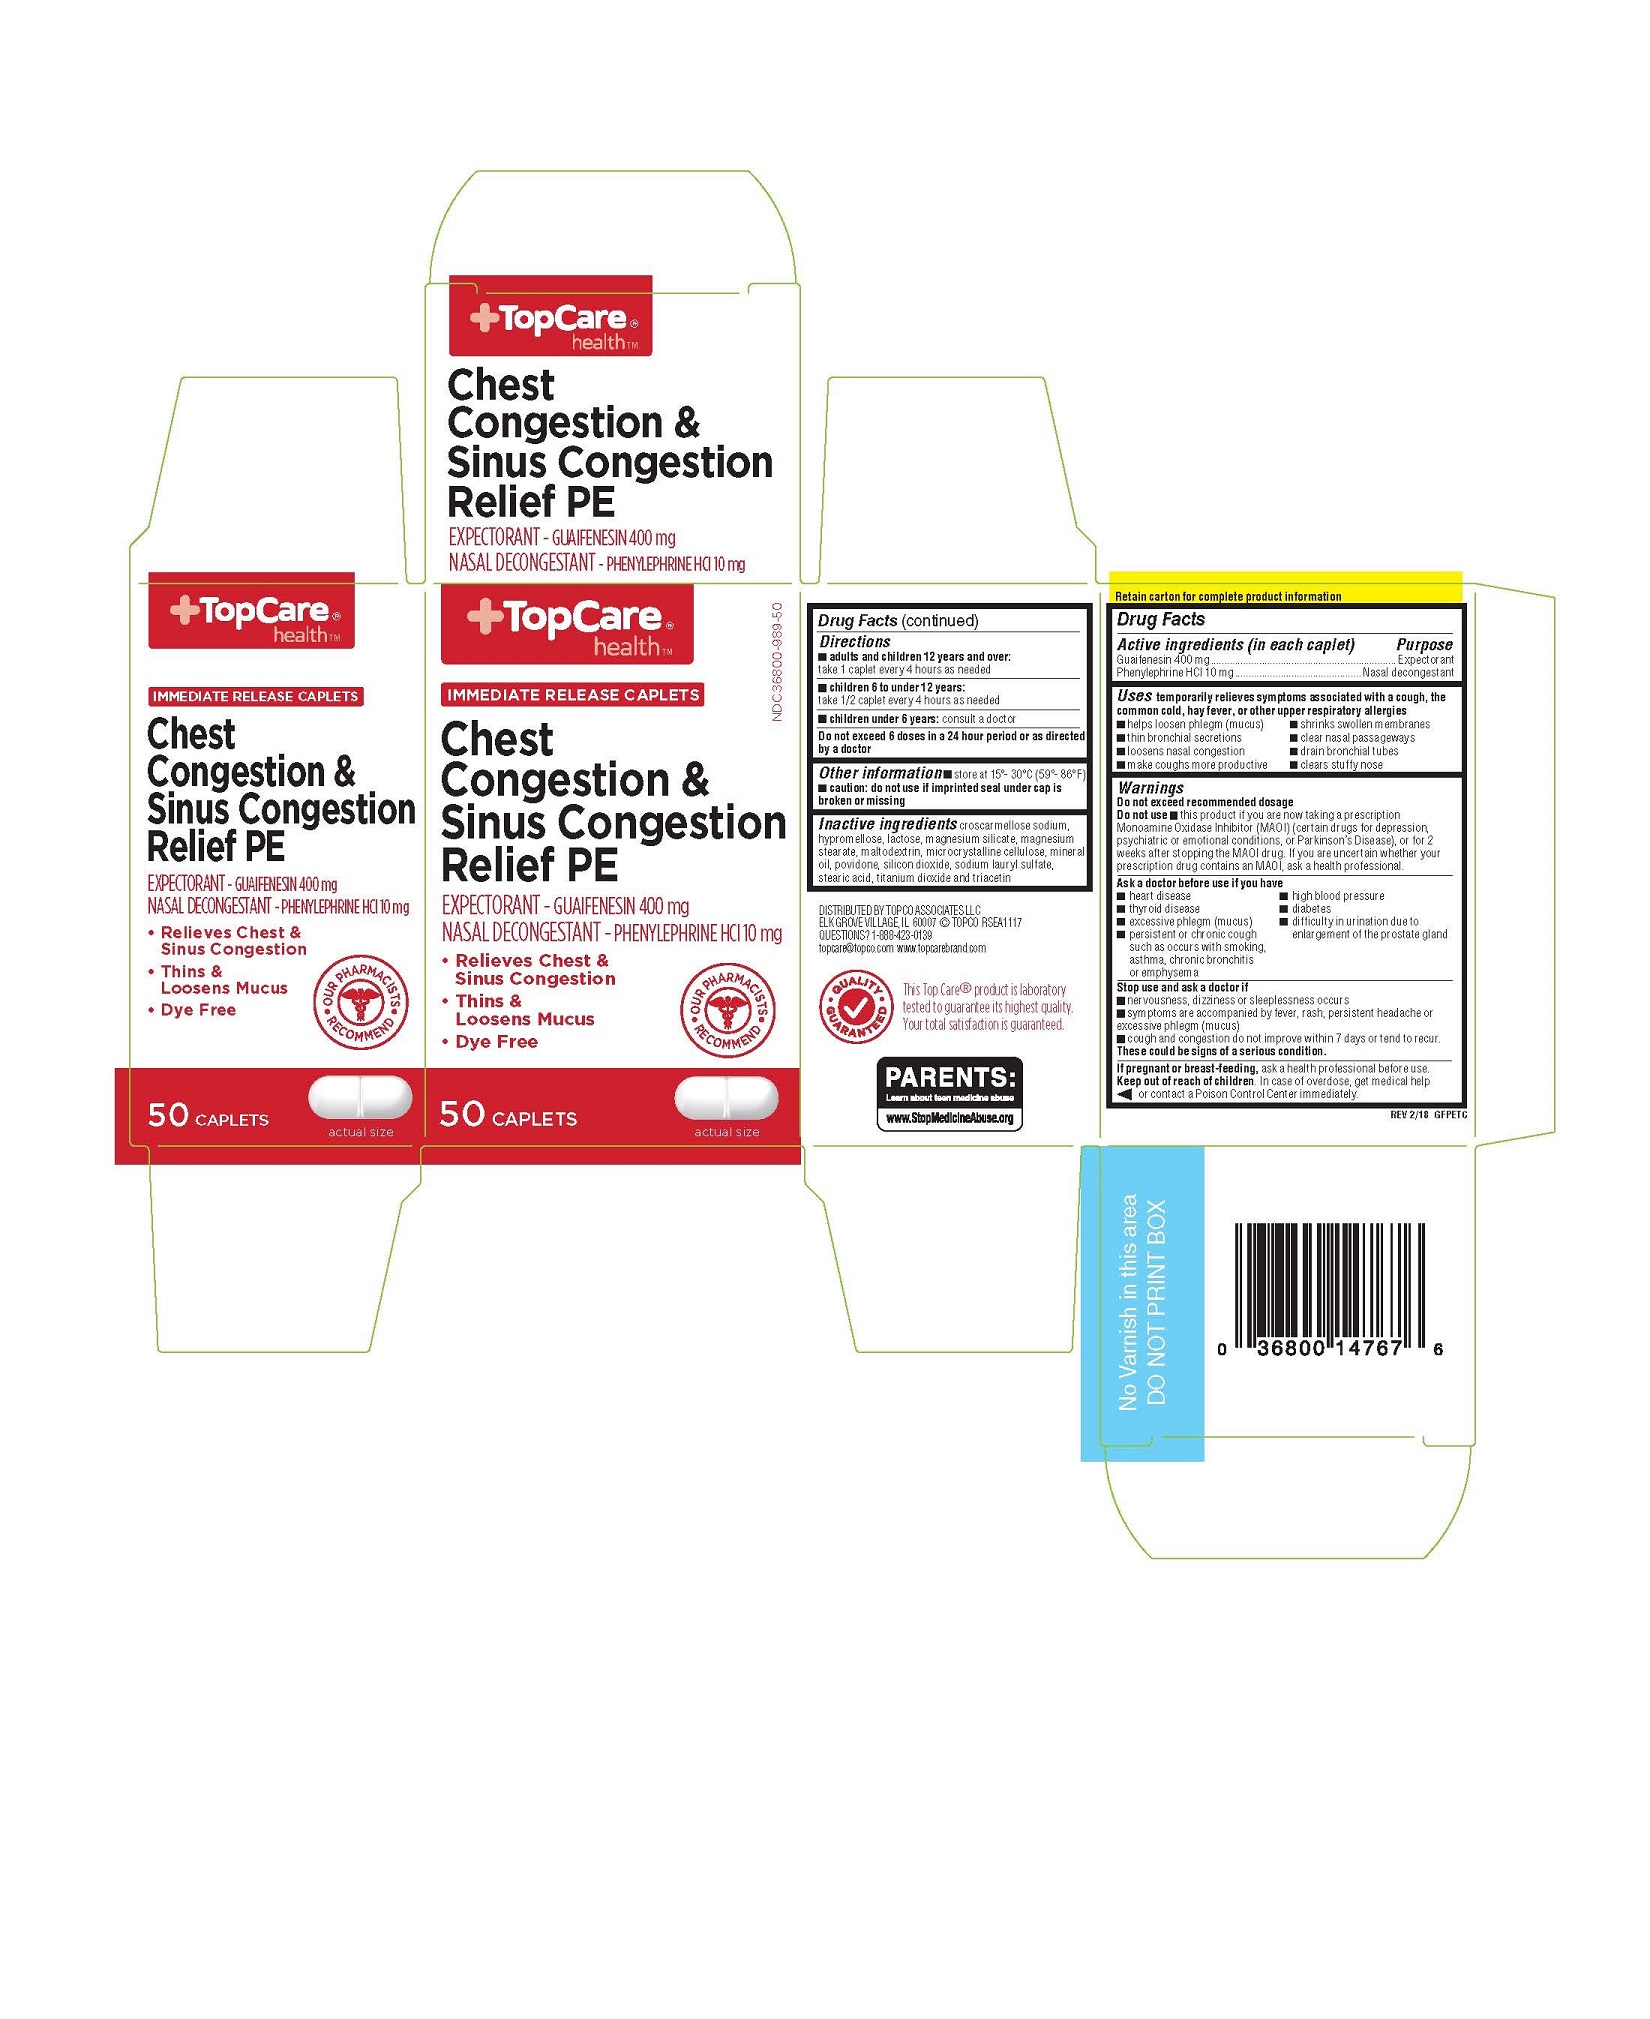 Topcare Chest Congestion And Sinus Congestion Relief Pe | Guaifenesin/phenylephrine Tablet while Breastfeeding